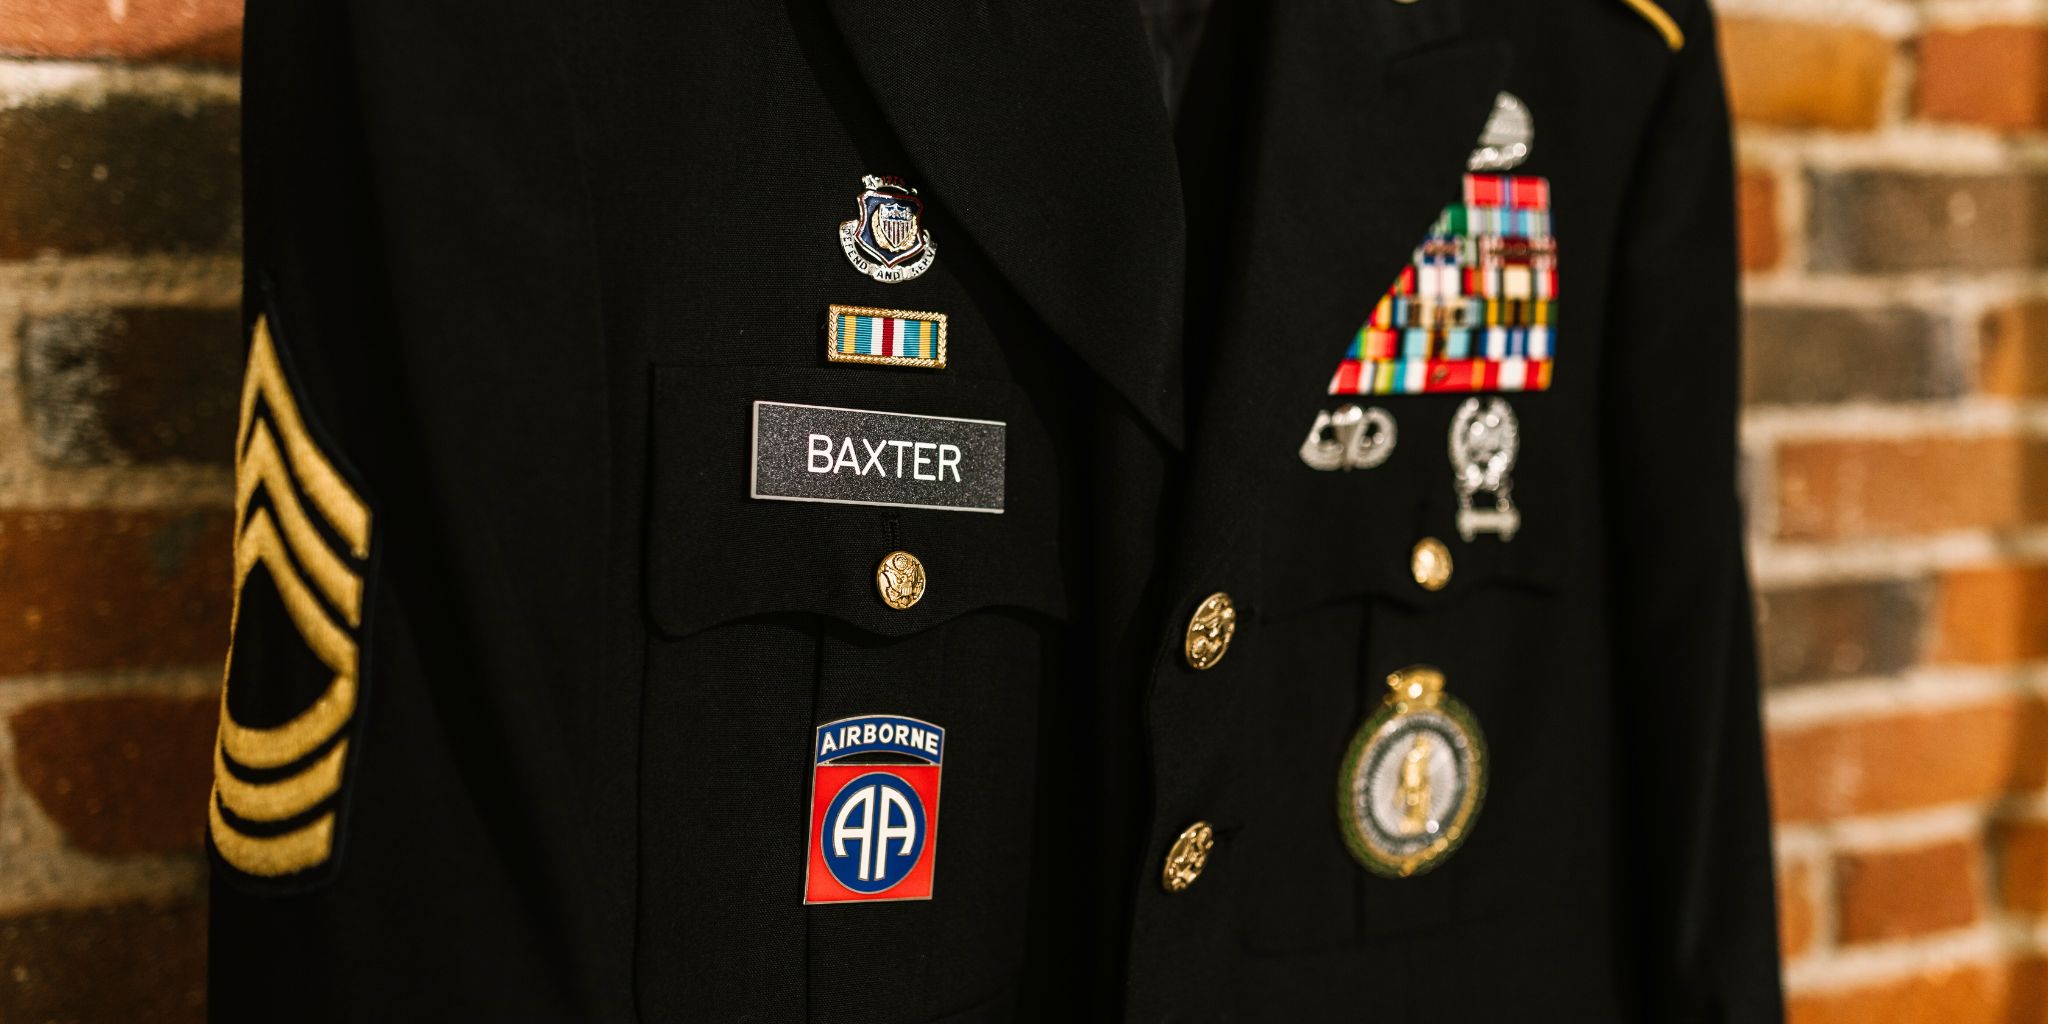 military coat decorated with various awards and nametag Baxter